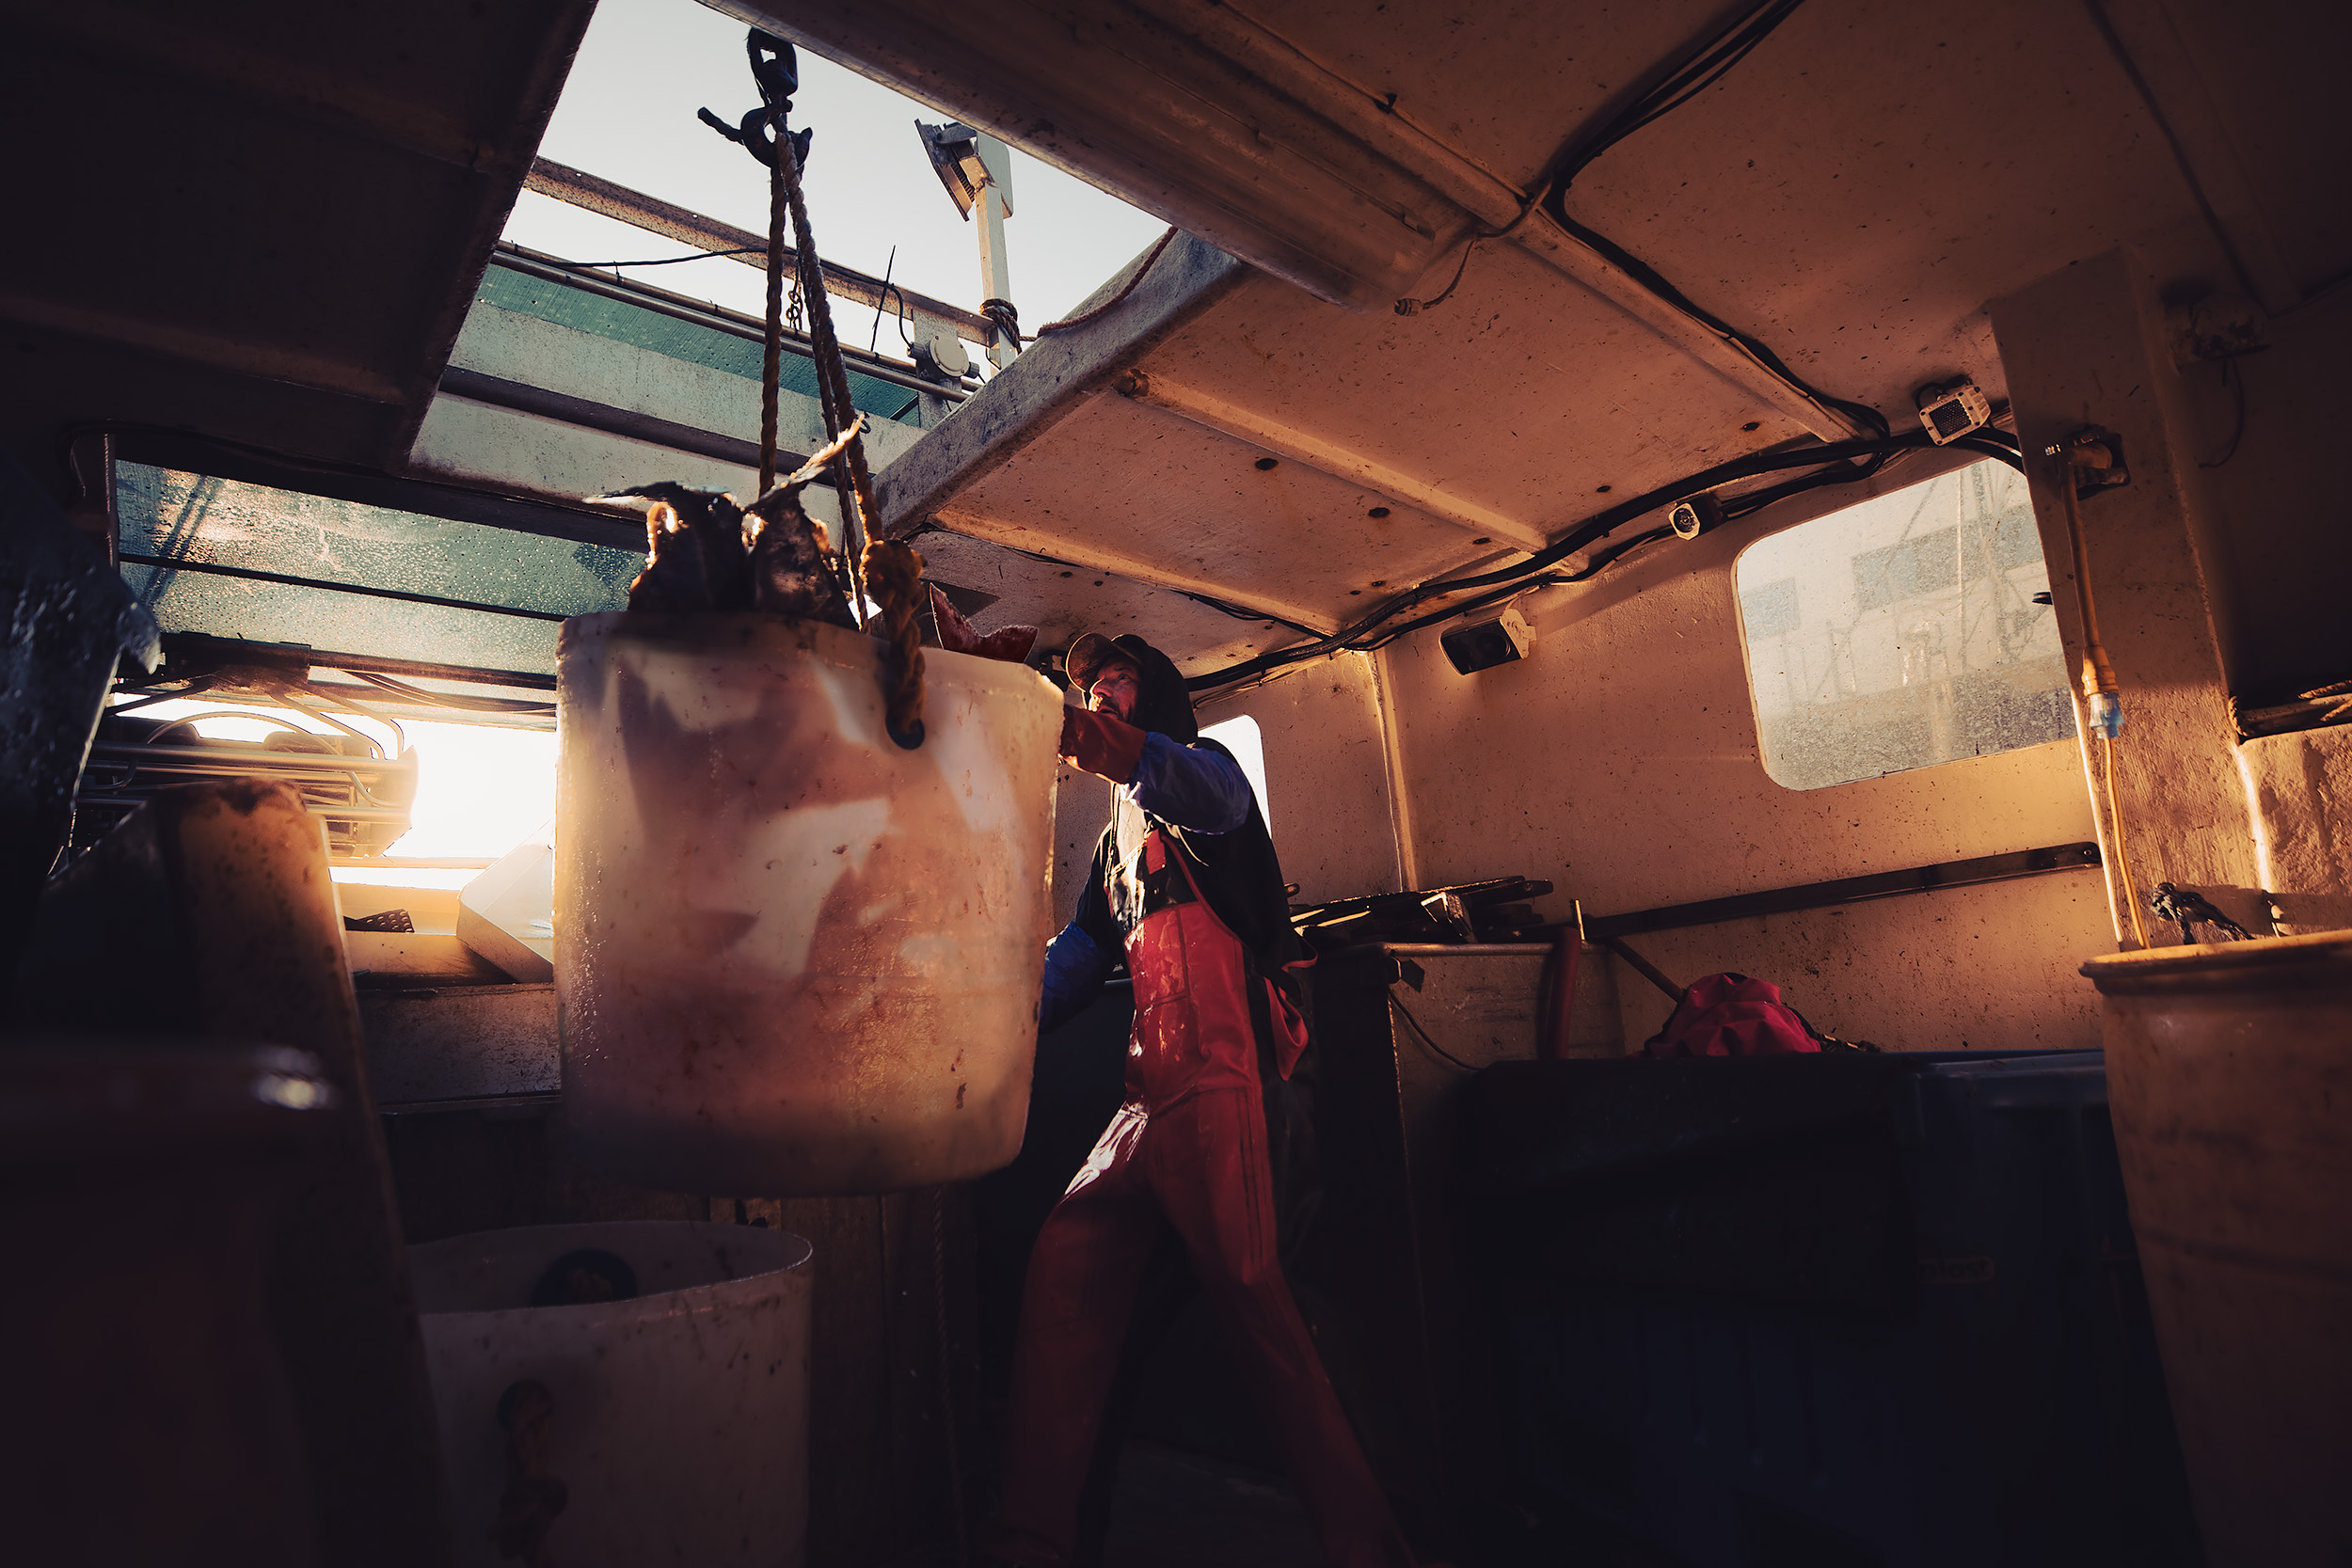 OFF LOADING FISH COMMERCIAL FISHING SCOTT GABLE COMMERCIAL SCI TECH INDUSTRIAL PHOTOGRAPHER